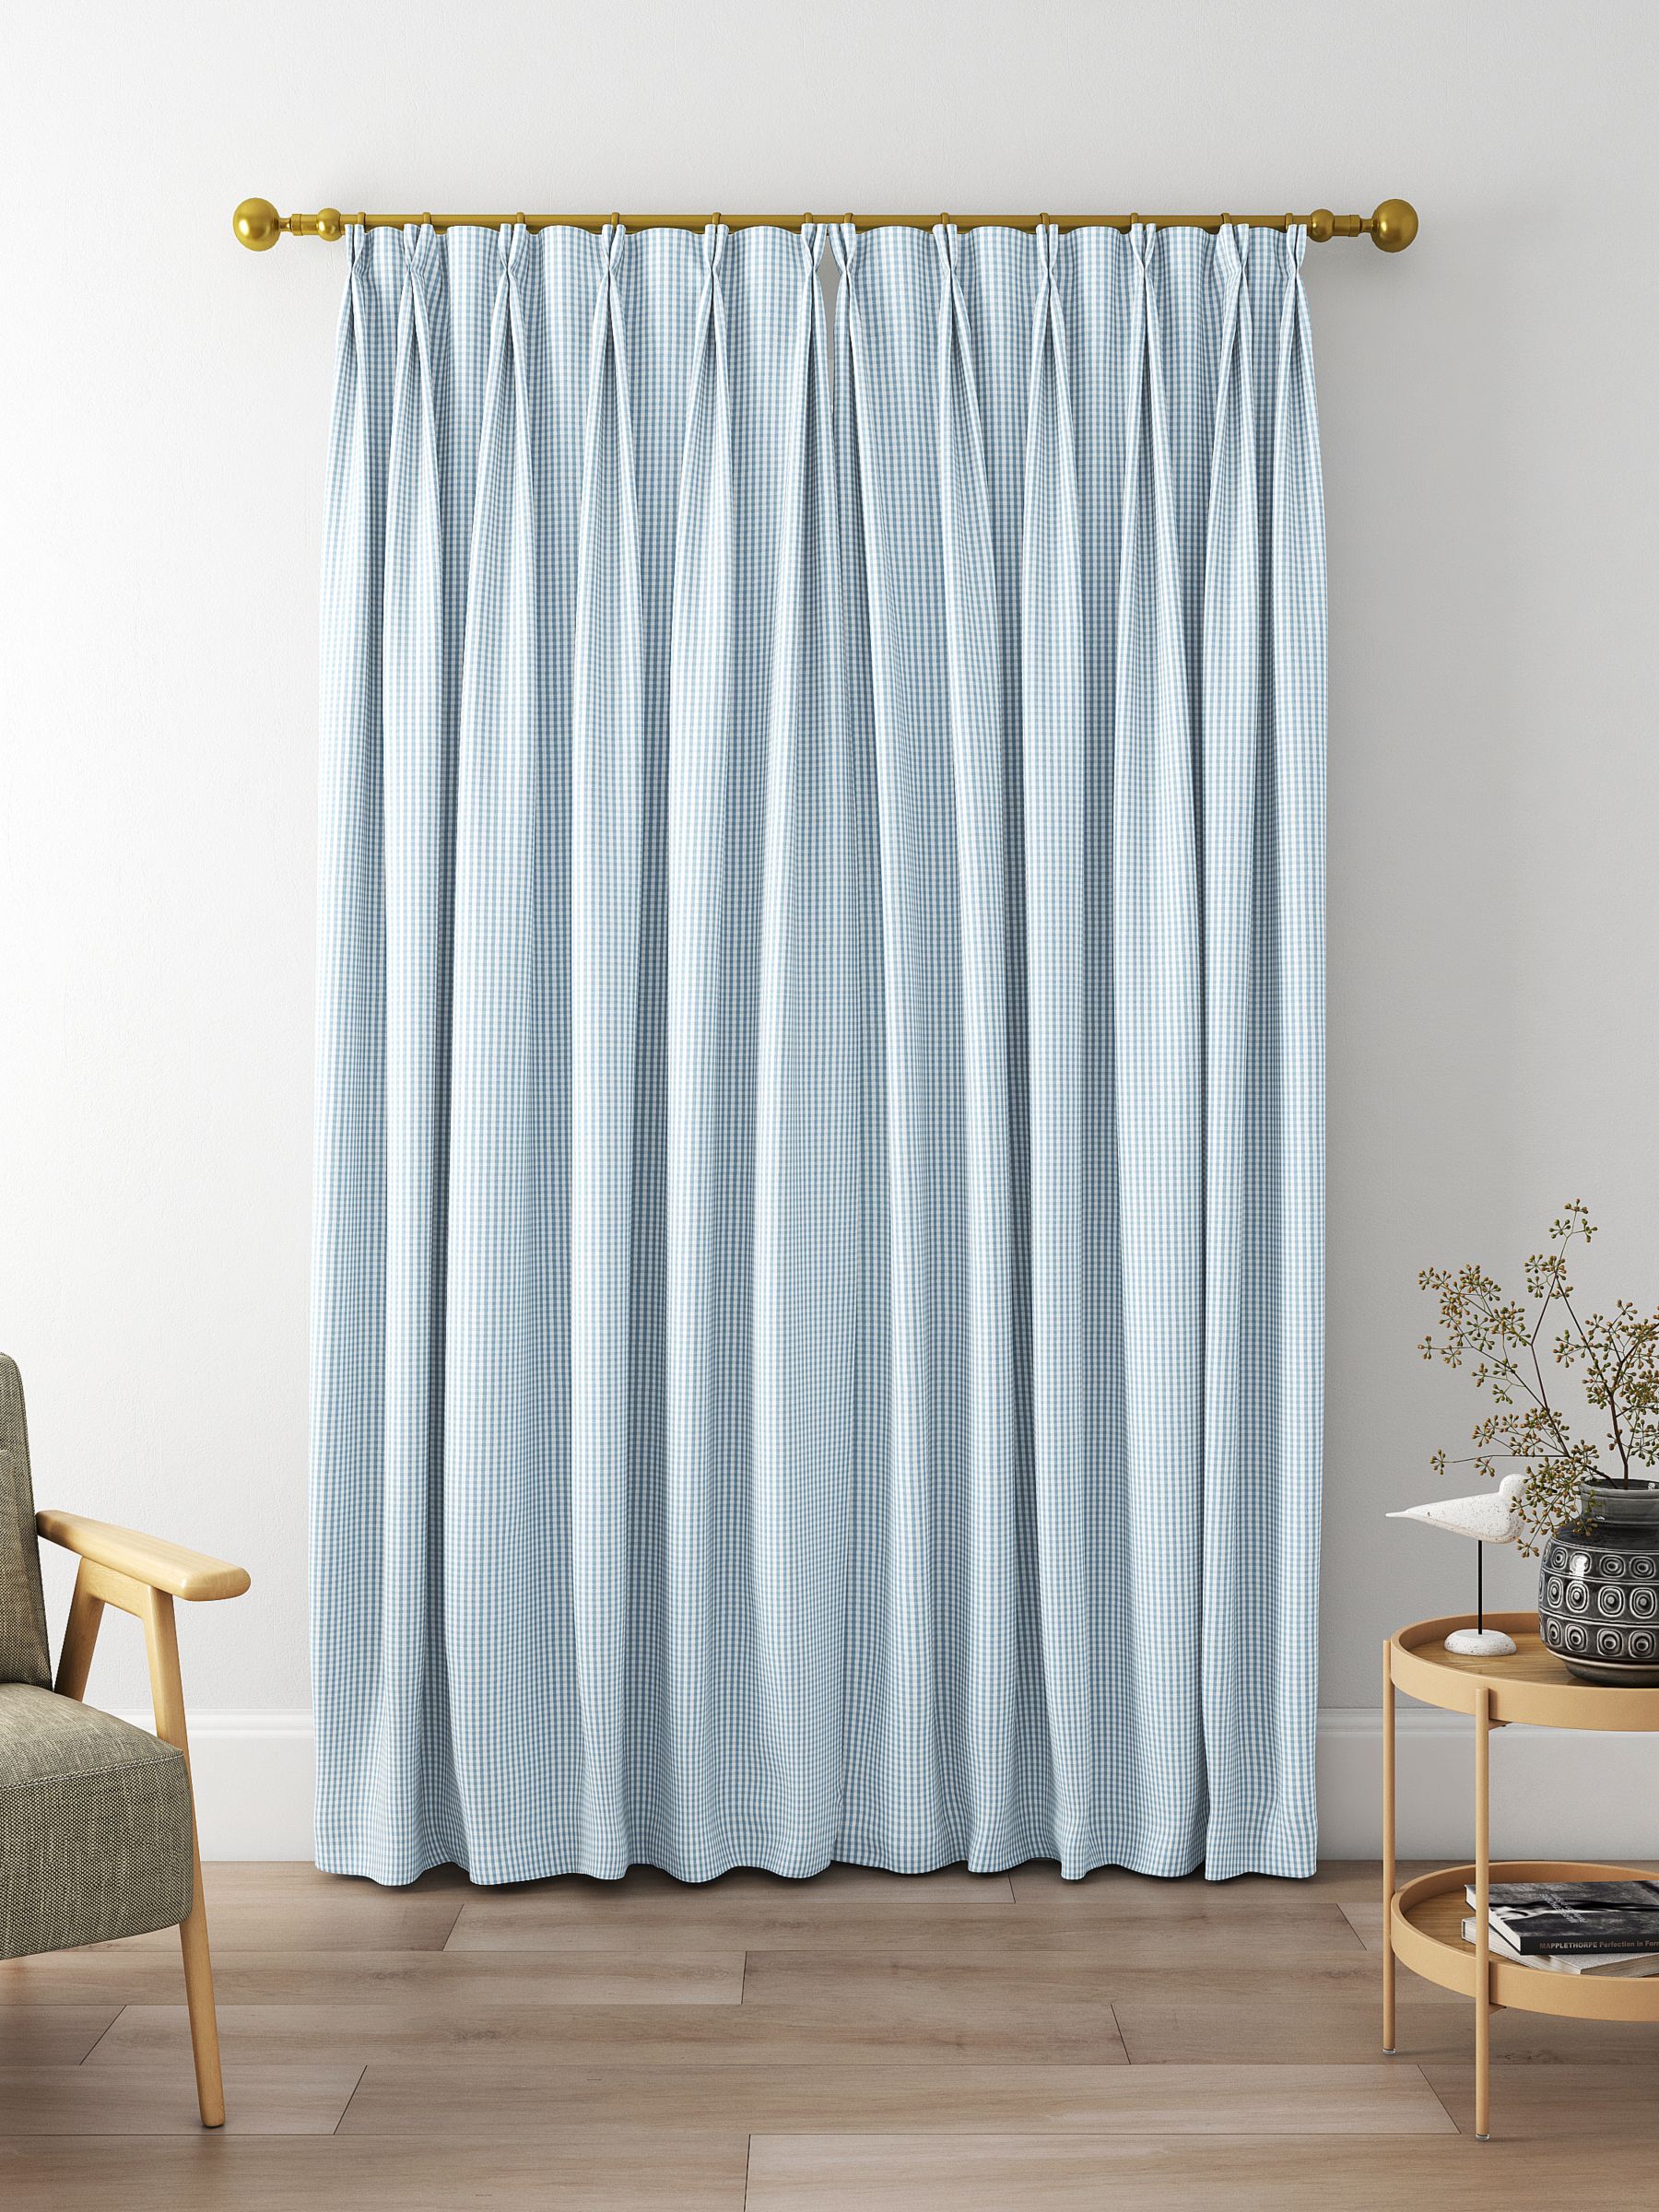 Clarke & Clarke Windsor Made to Measure Curtains, Chambray